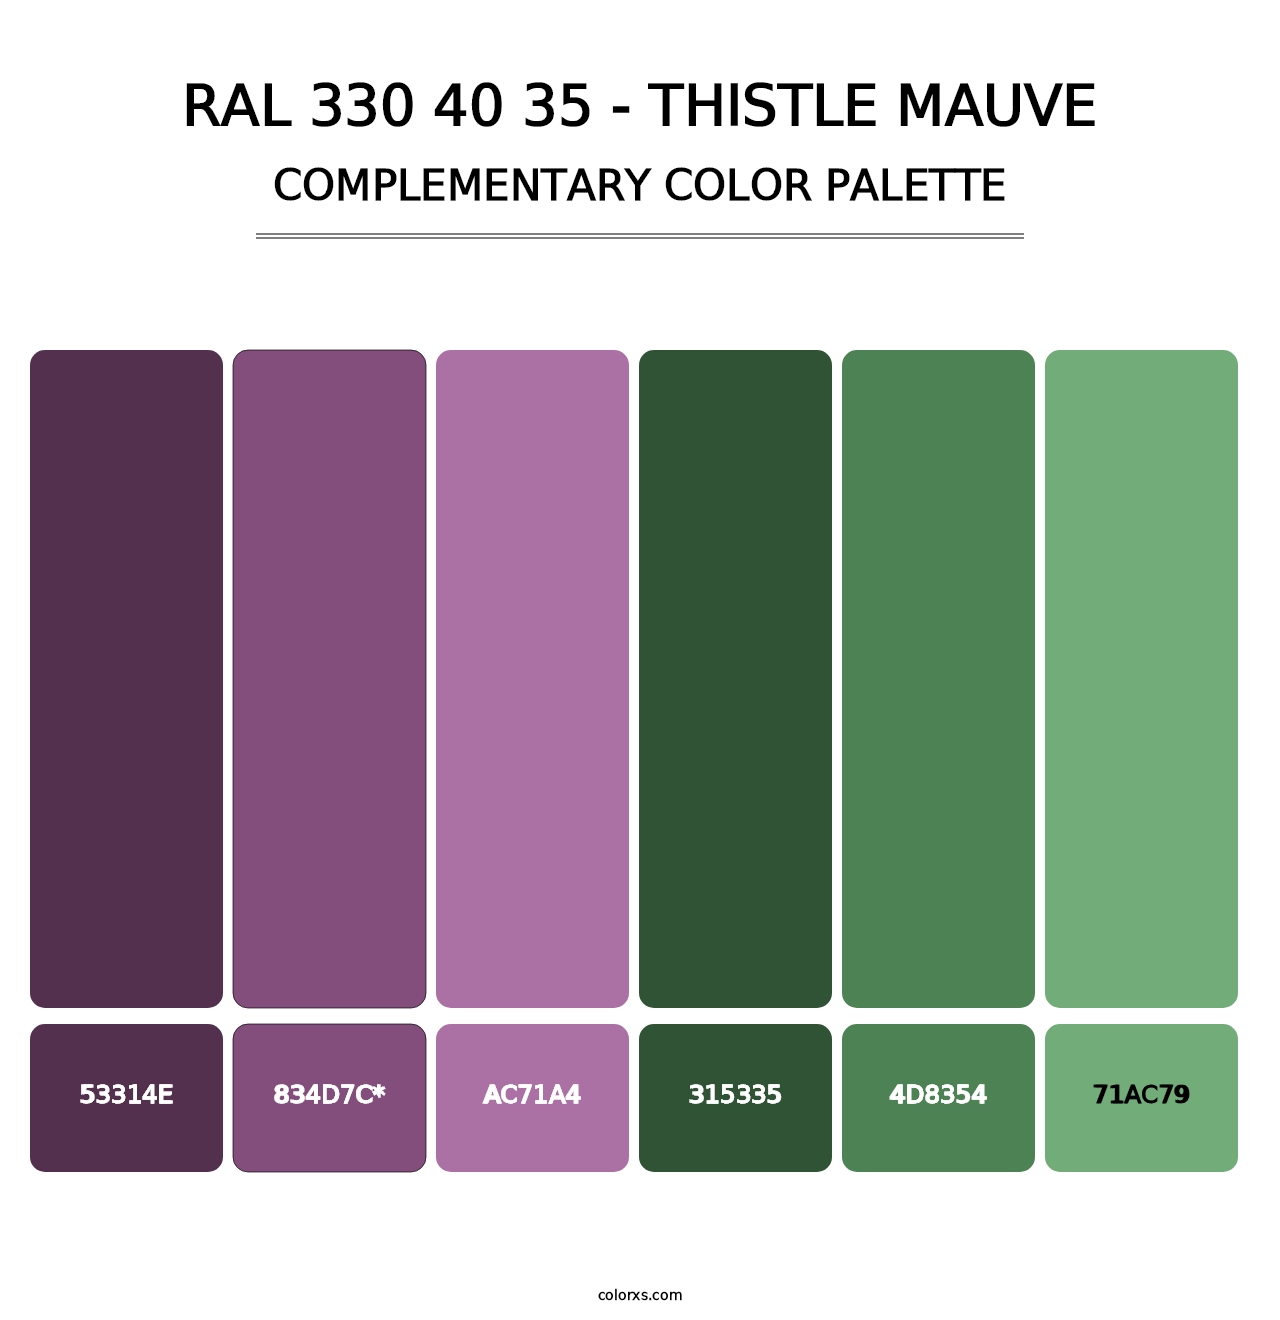 RAL 330 40 35 - Thistle Mauve - Complementary Color Palette